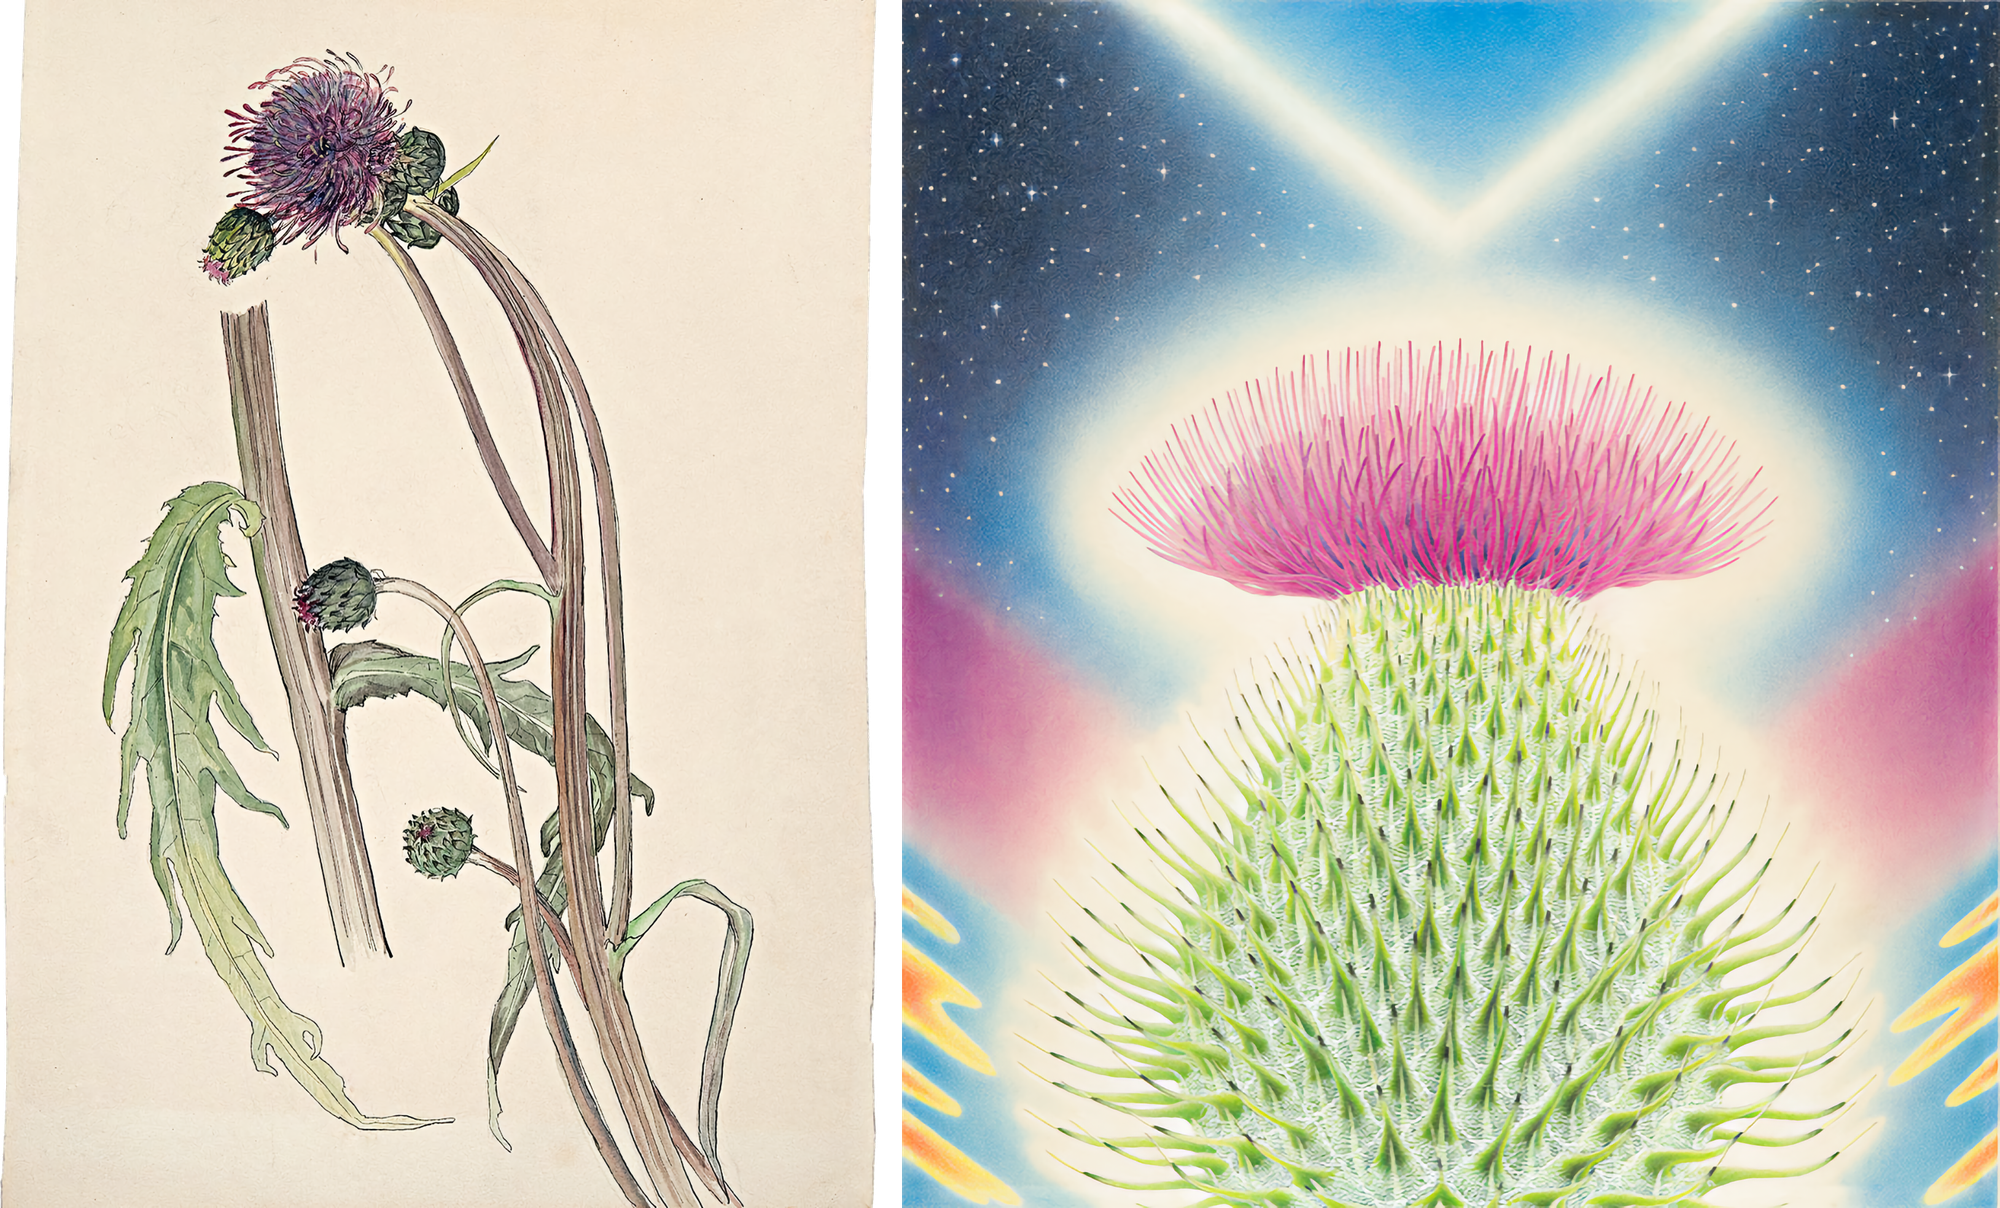 (left) Drawing of thistle flower with stems; (right) Paiting of thistle flower against background of stars.